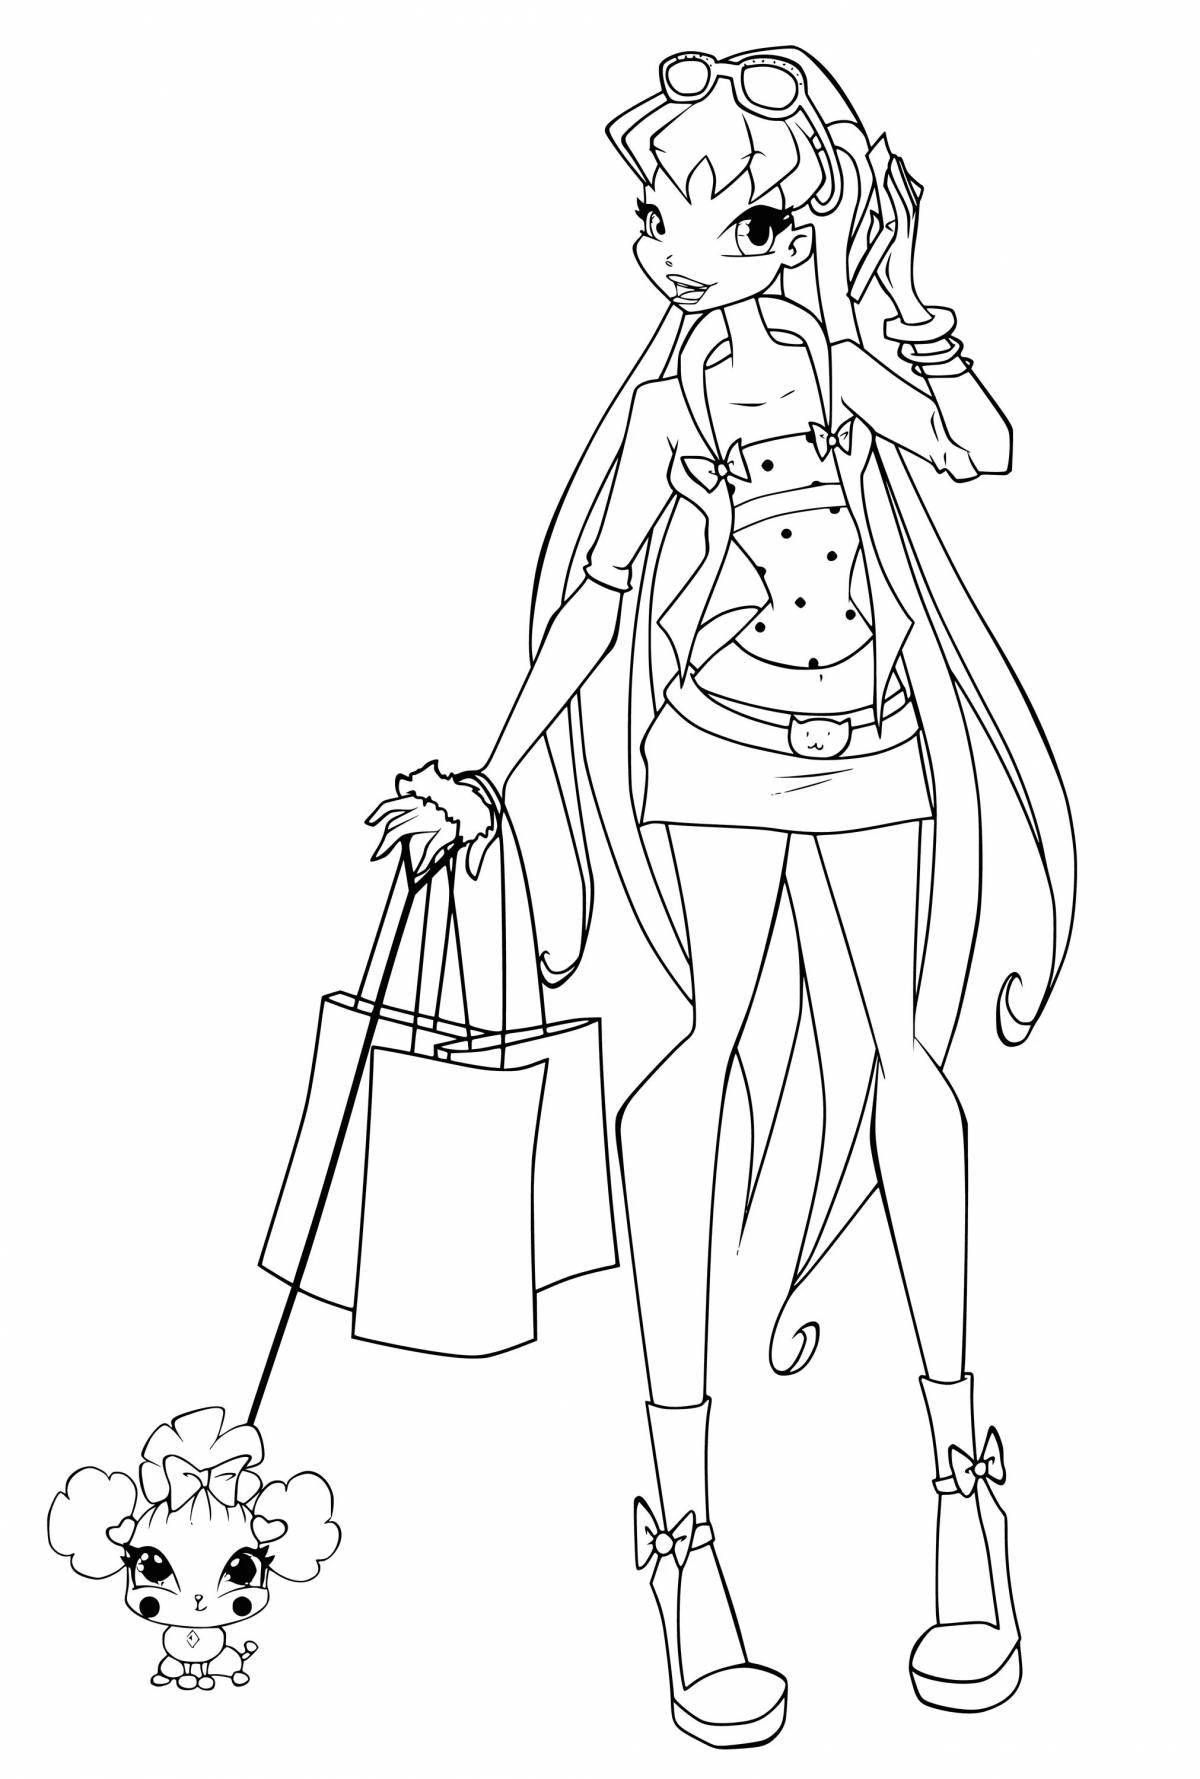 Animated stella coloring page